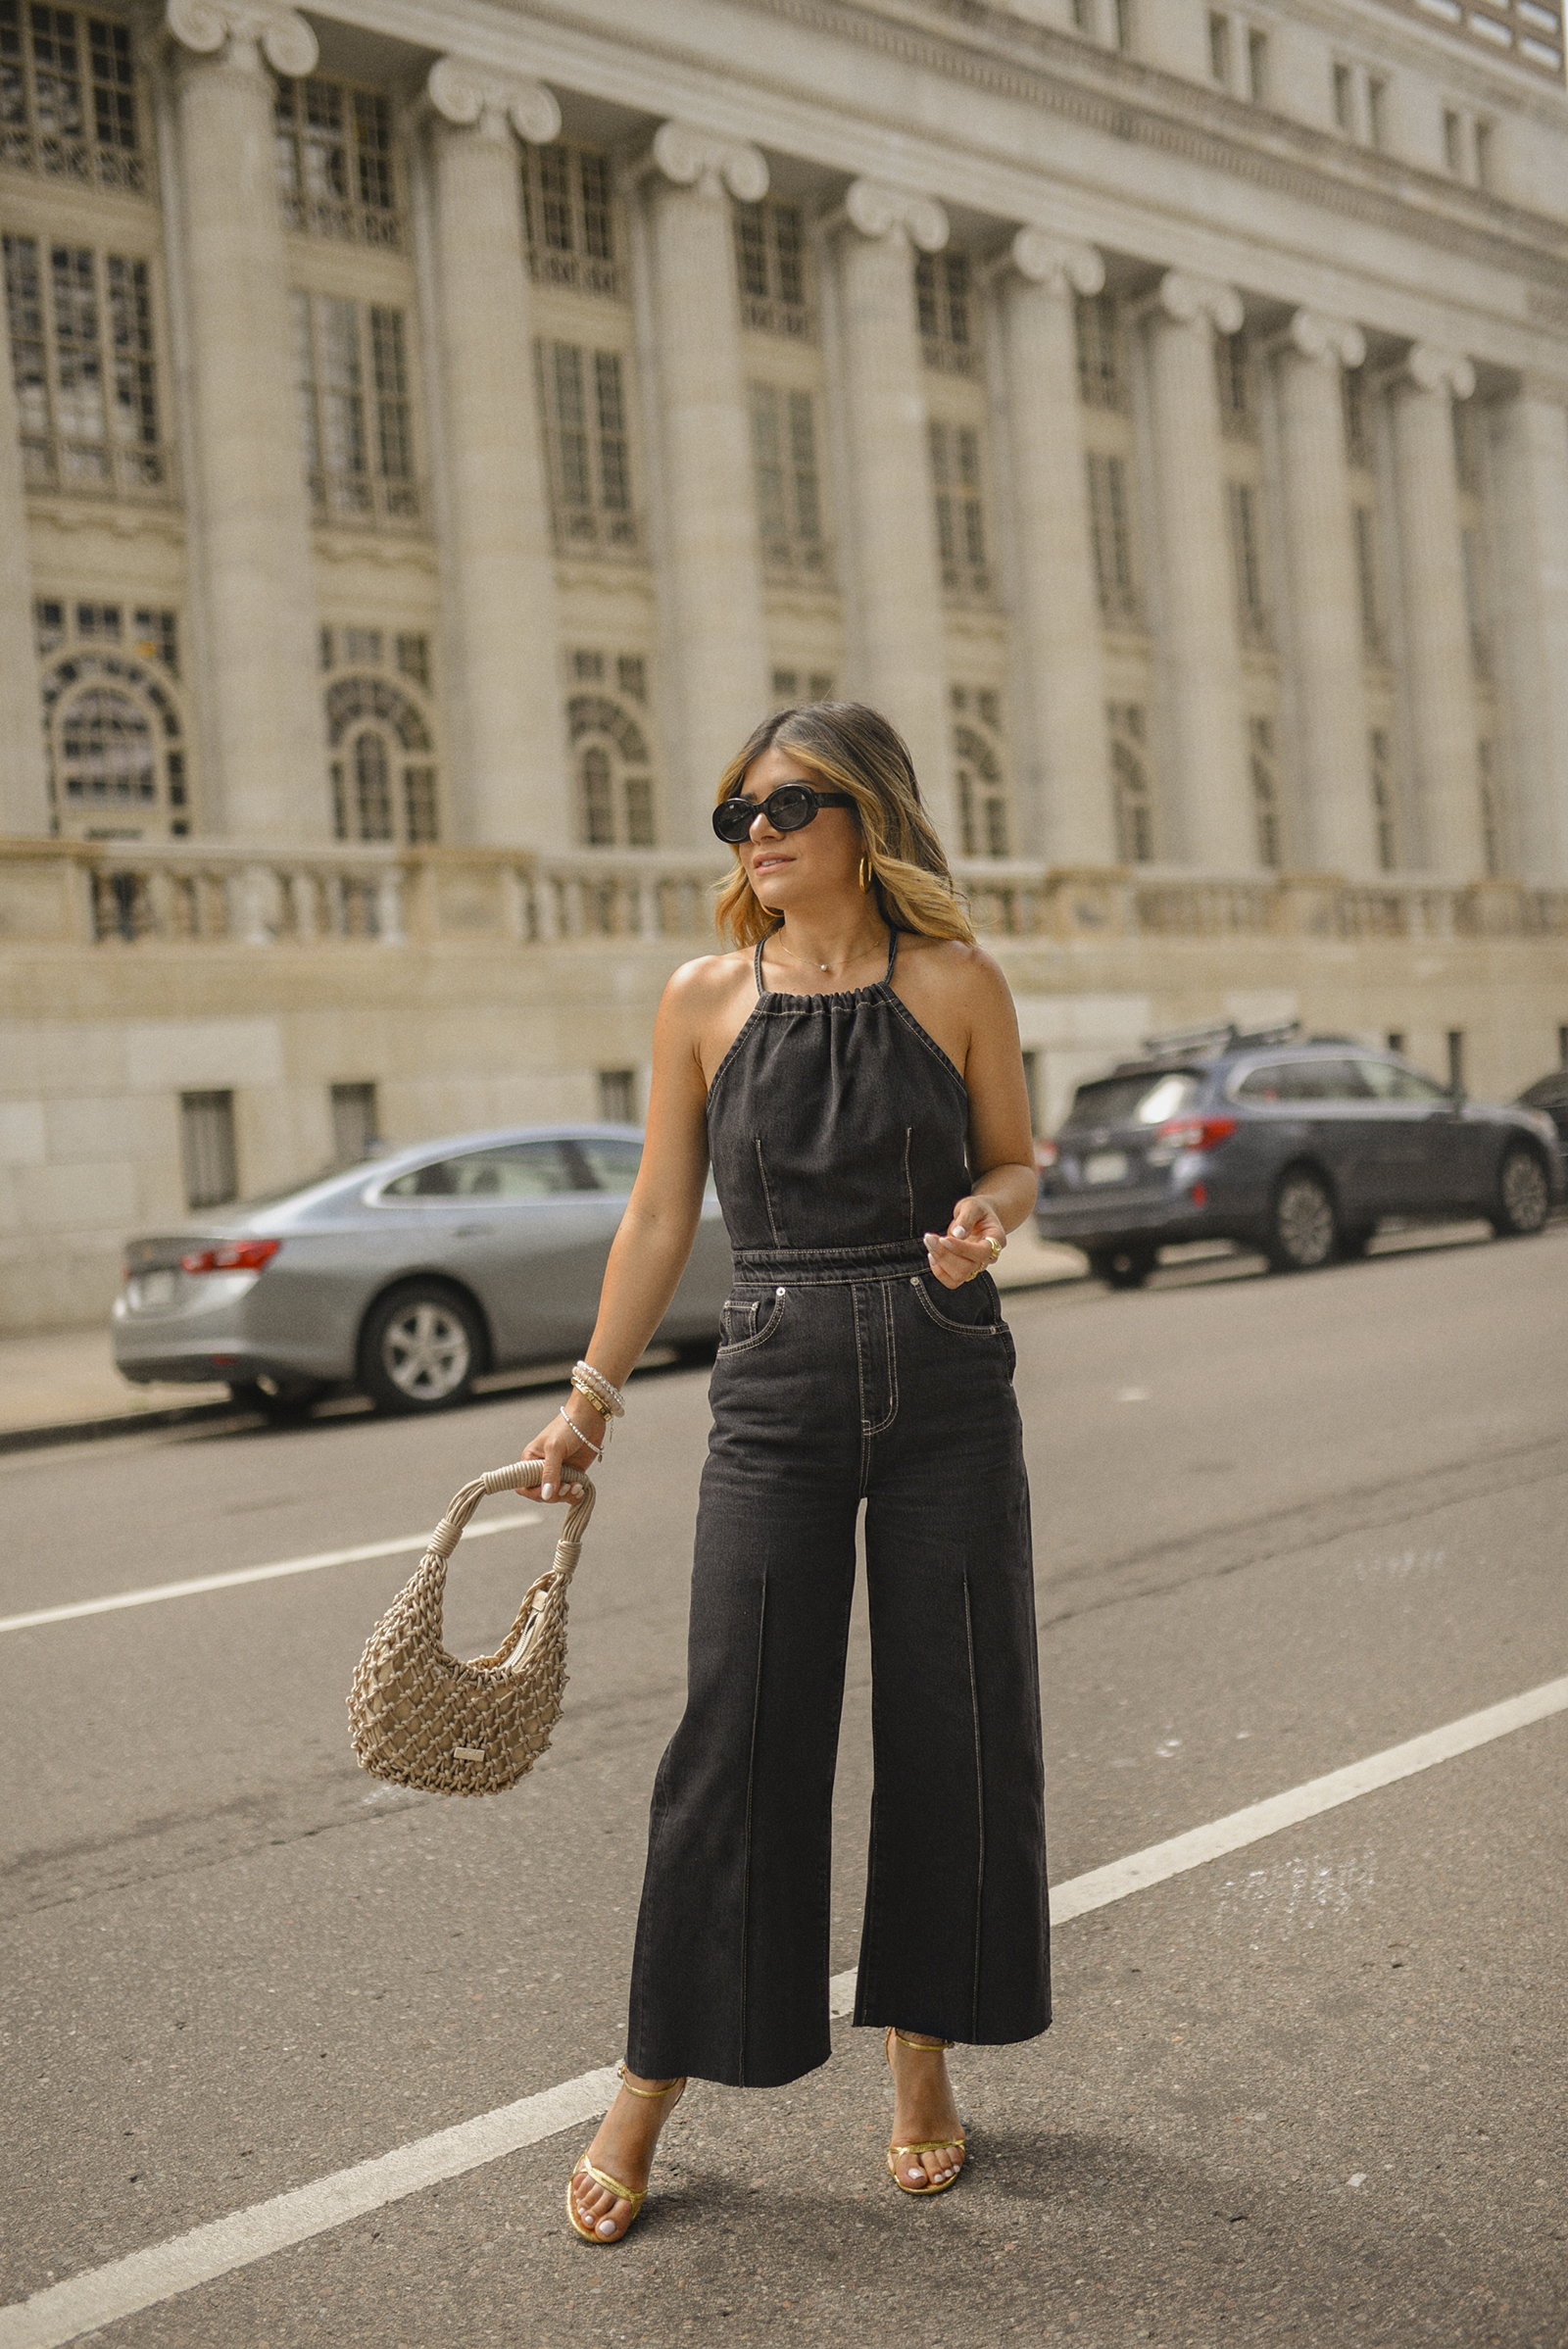 STYLING A DENIM JUMPSUIT FOR SUMMER, CHIC TALK